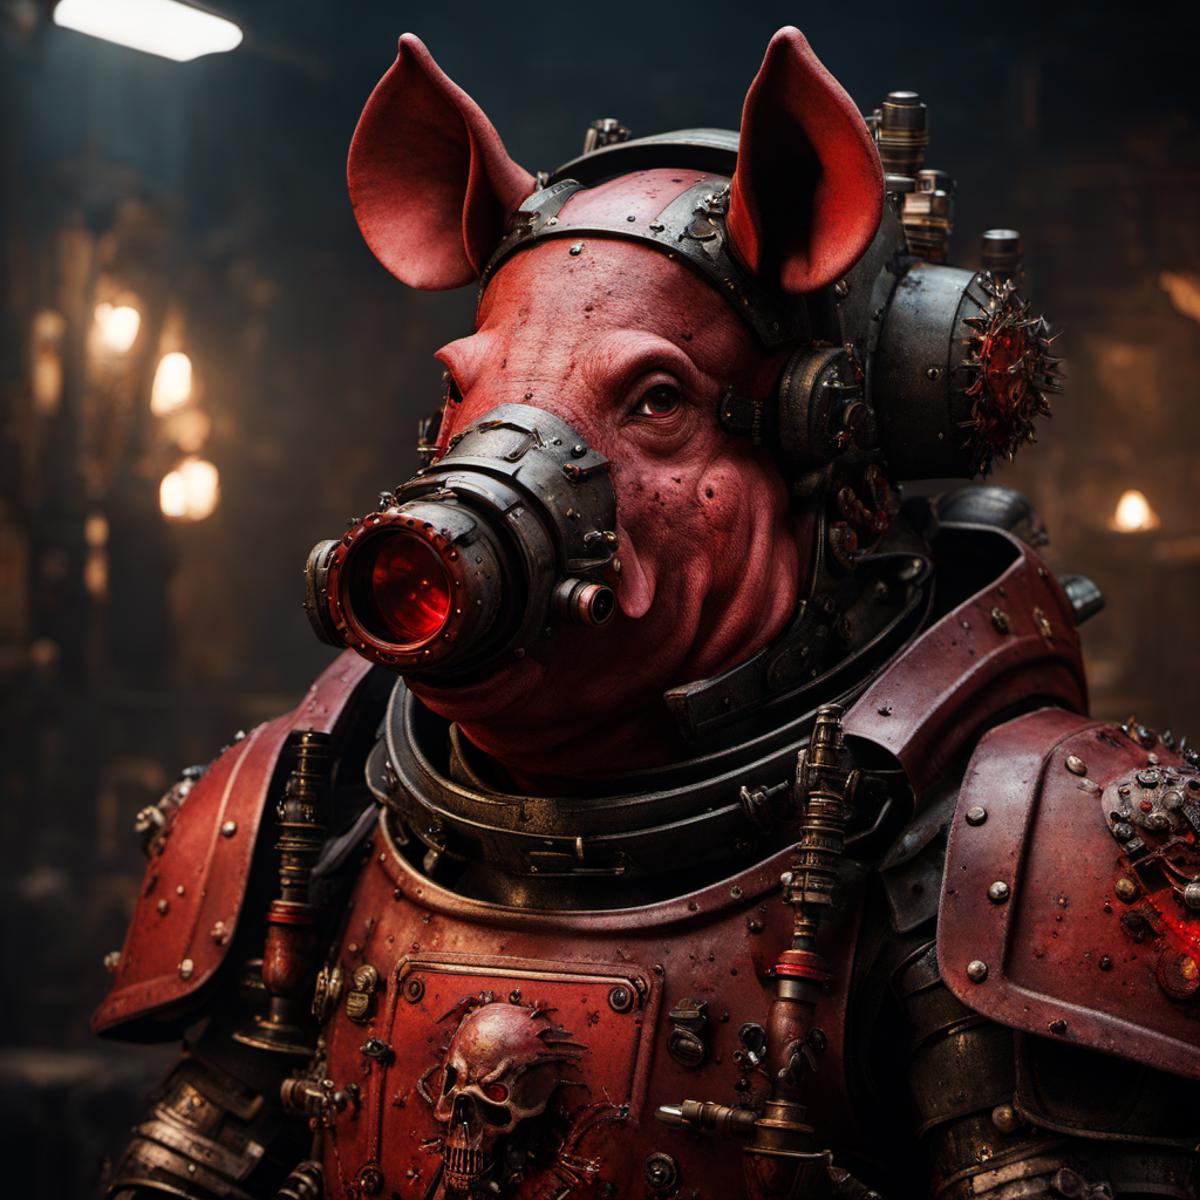 A close-up of a robot wearing a red helmet with a pig's face.